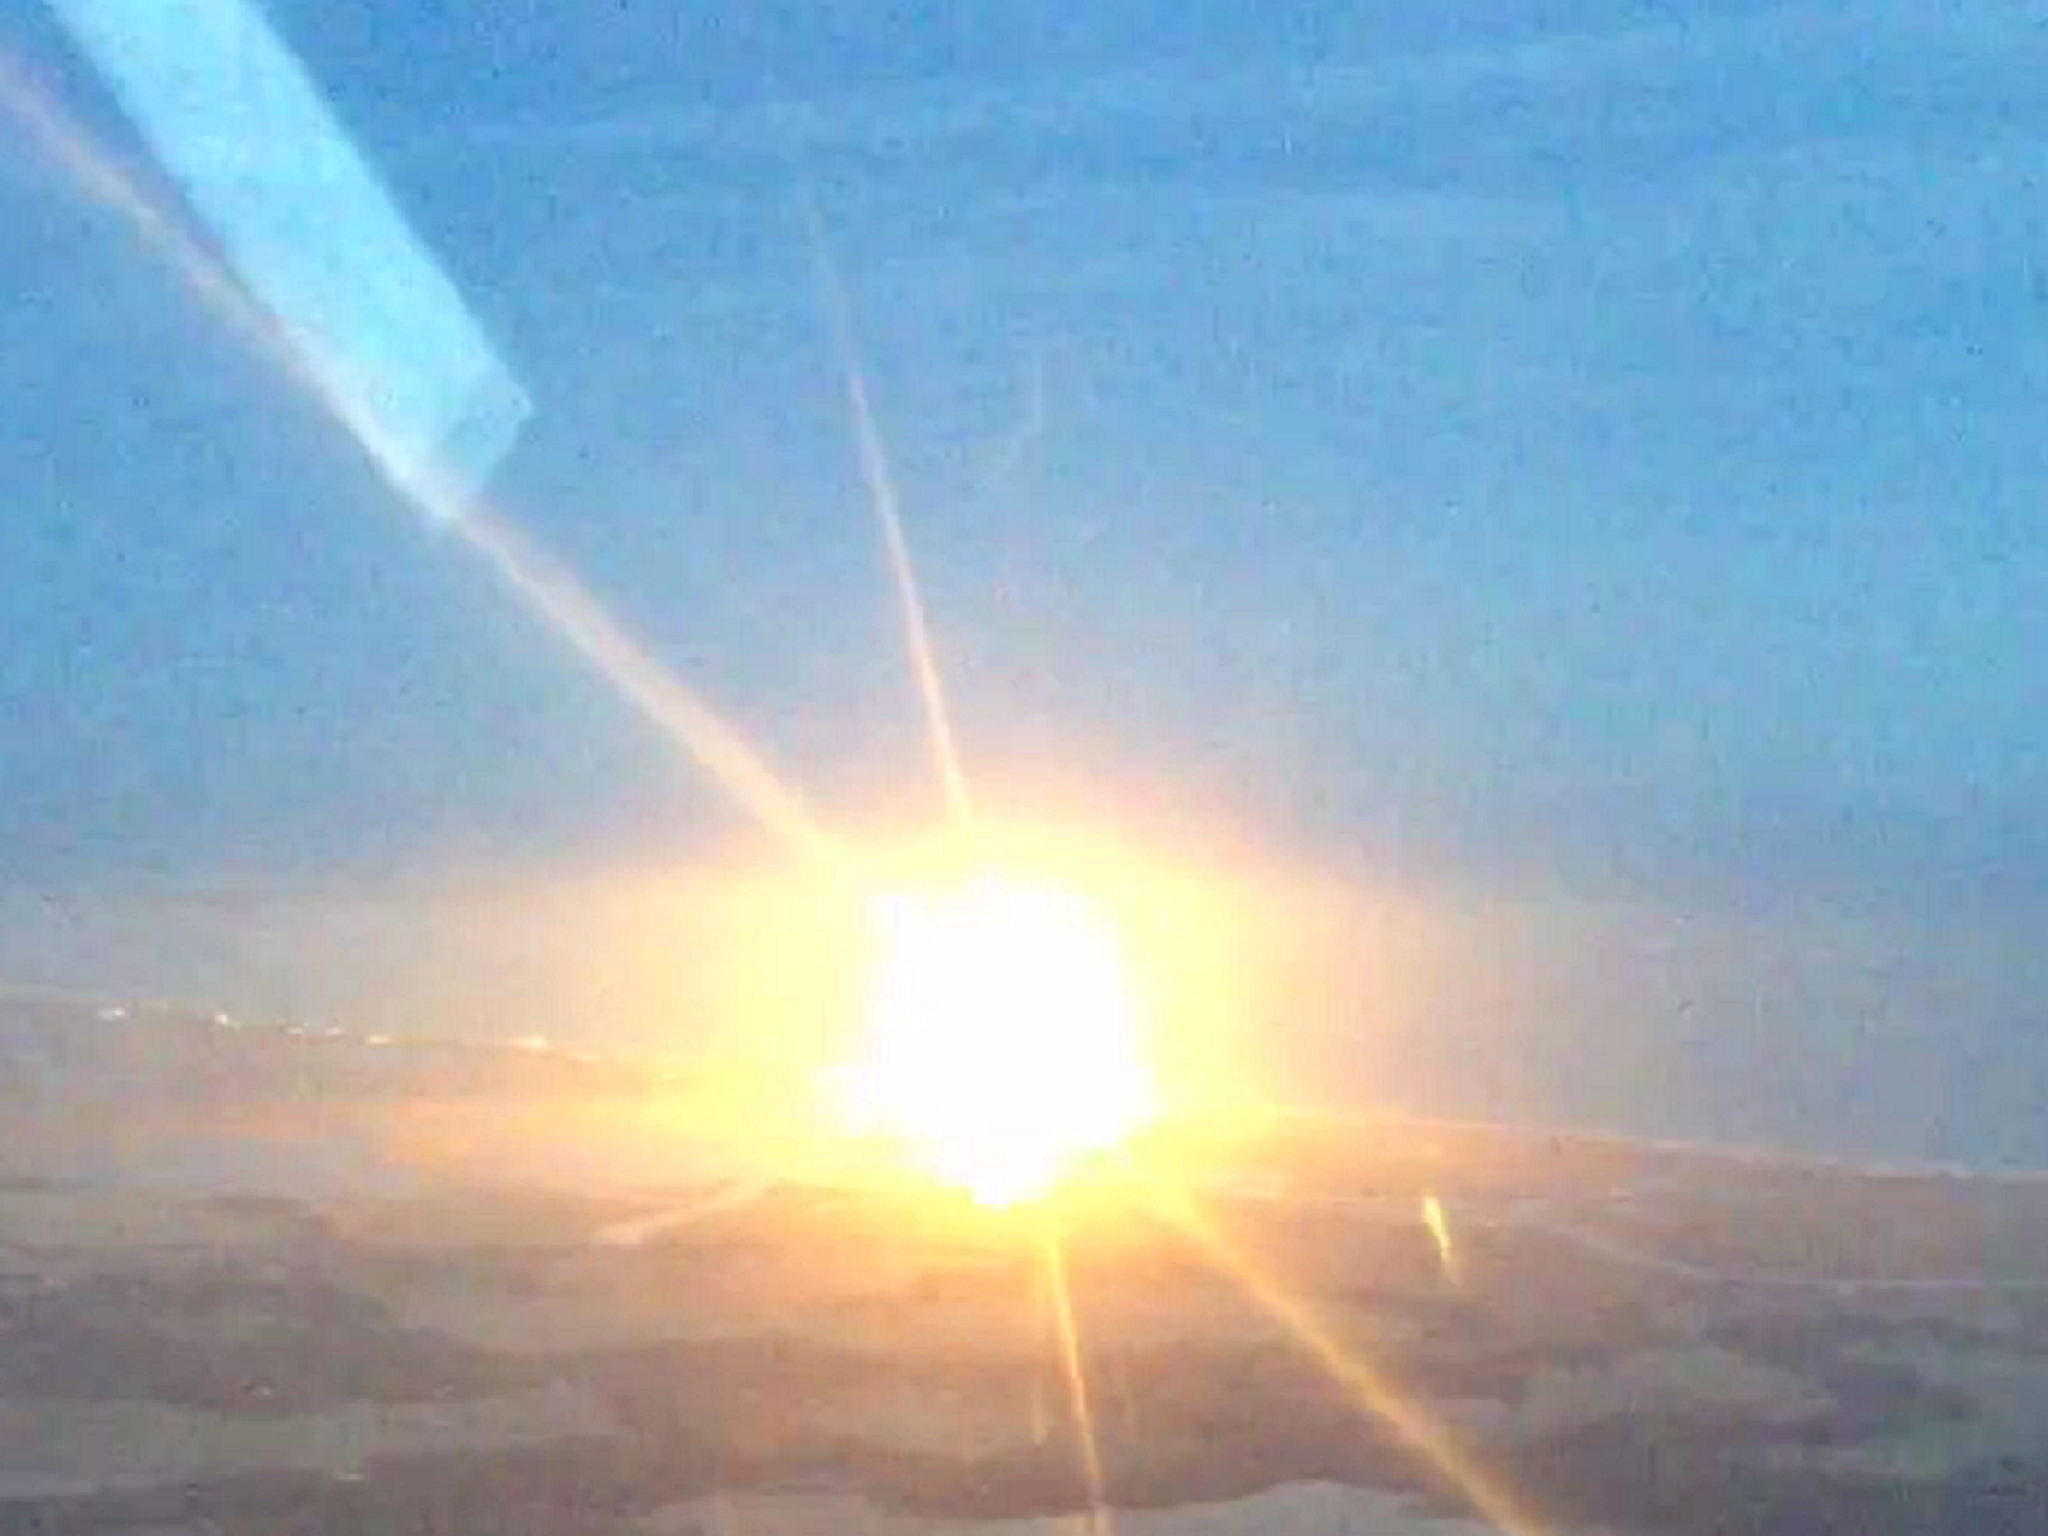 The unmanned Orbital Sciences Antares rocket exploded into a huge fireball moments after take-off.